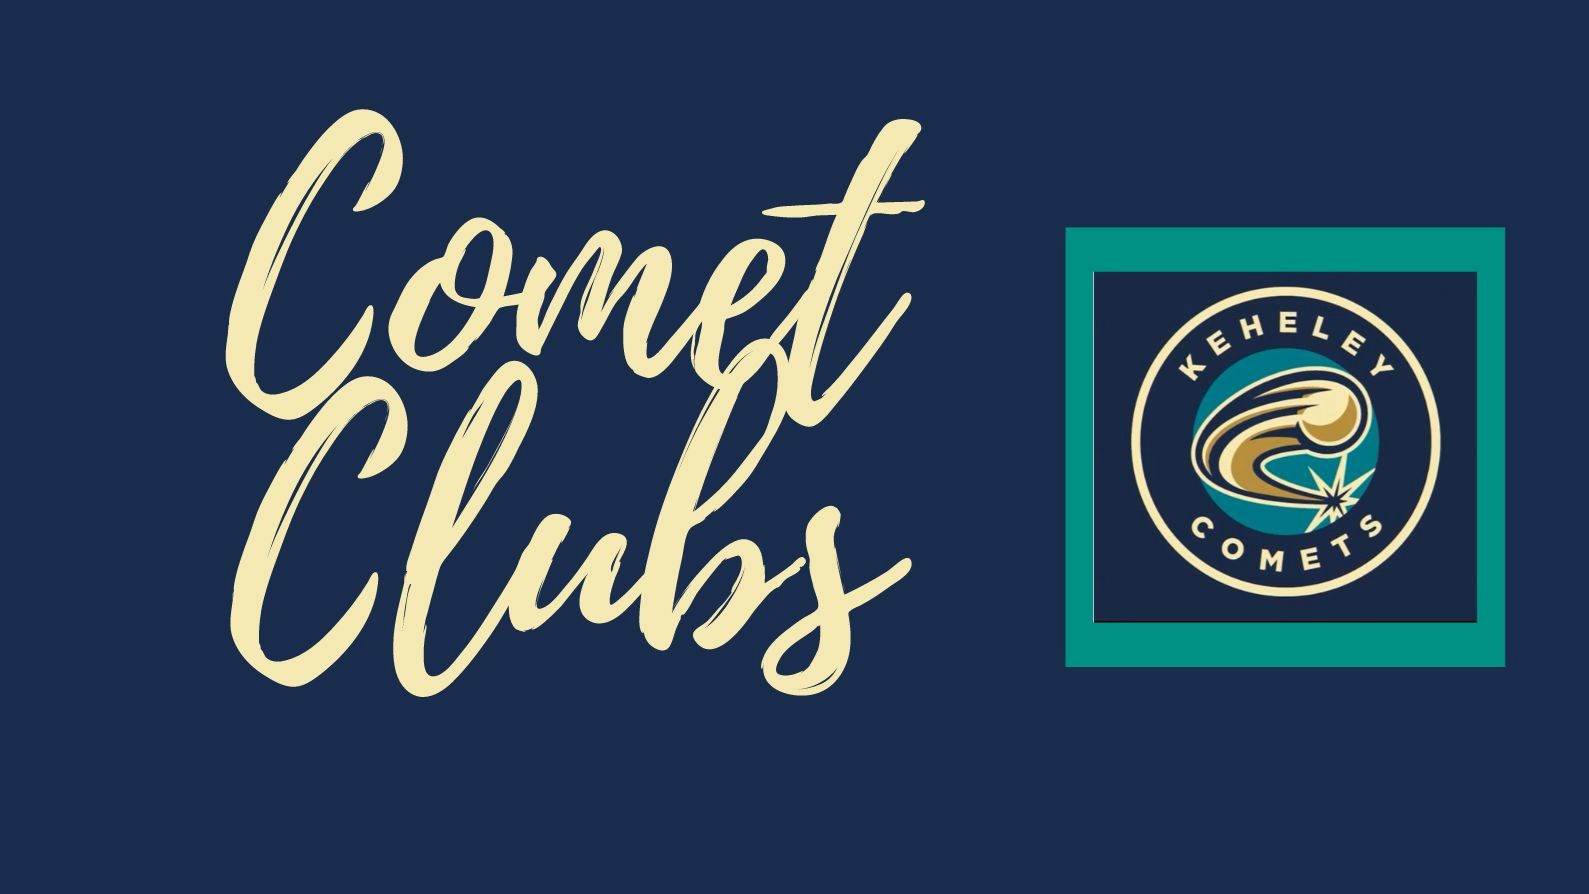 Keheley logo with words - Comet Clubs